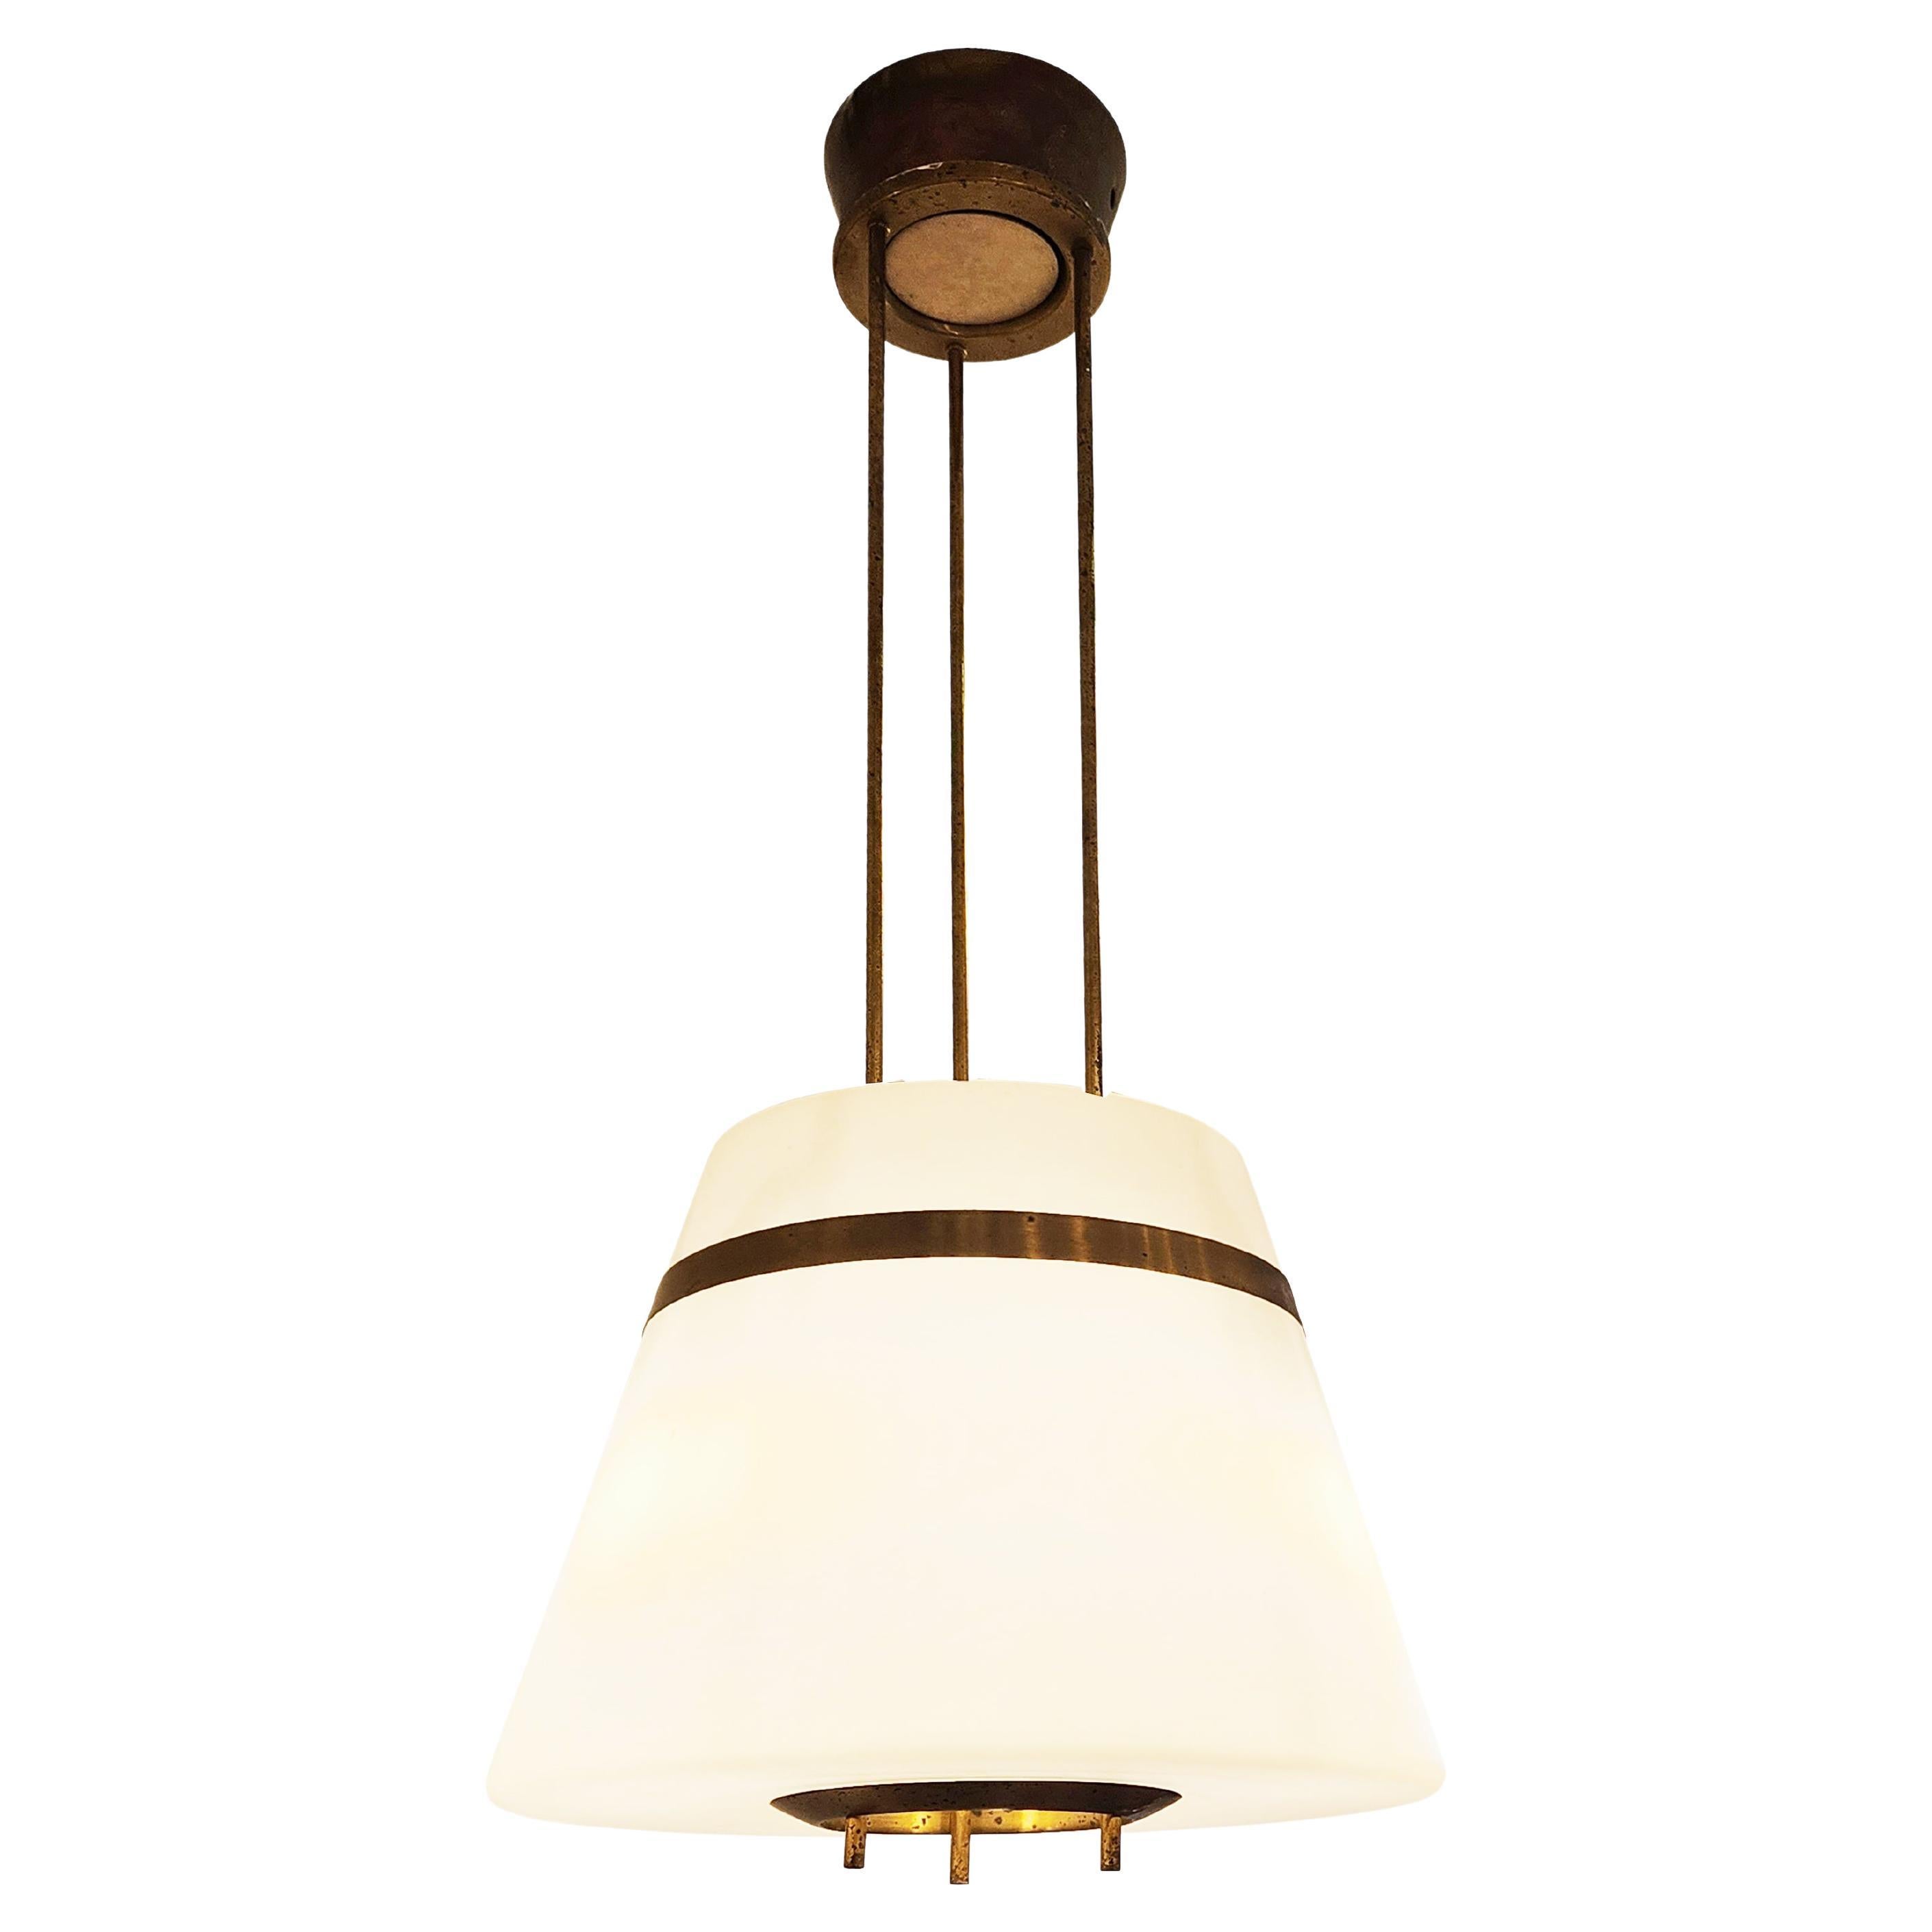 Fontana Arte Pendant Model 2454 by Max Ingrand
$7,500.00
Fontana Arte pendant model 2454 designed by Max Ingrand in the 1960s. Features a tapering frosted glass shade with brass hardware. Has an opening on the bottom and connects to the canopy via a